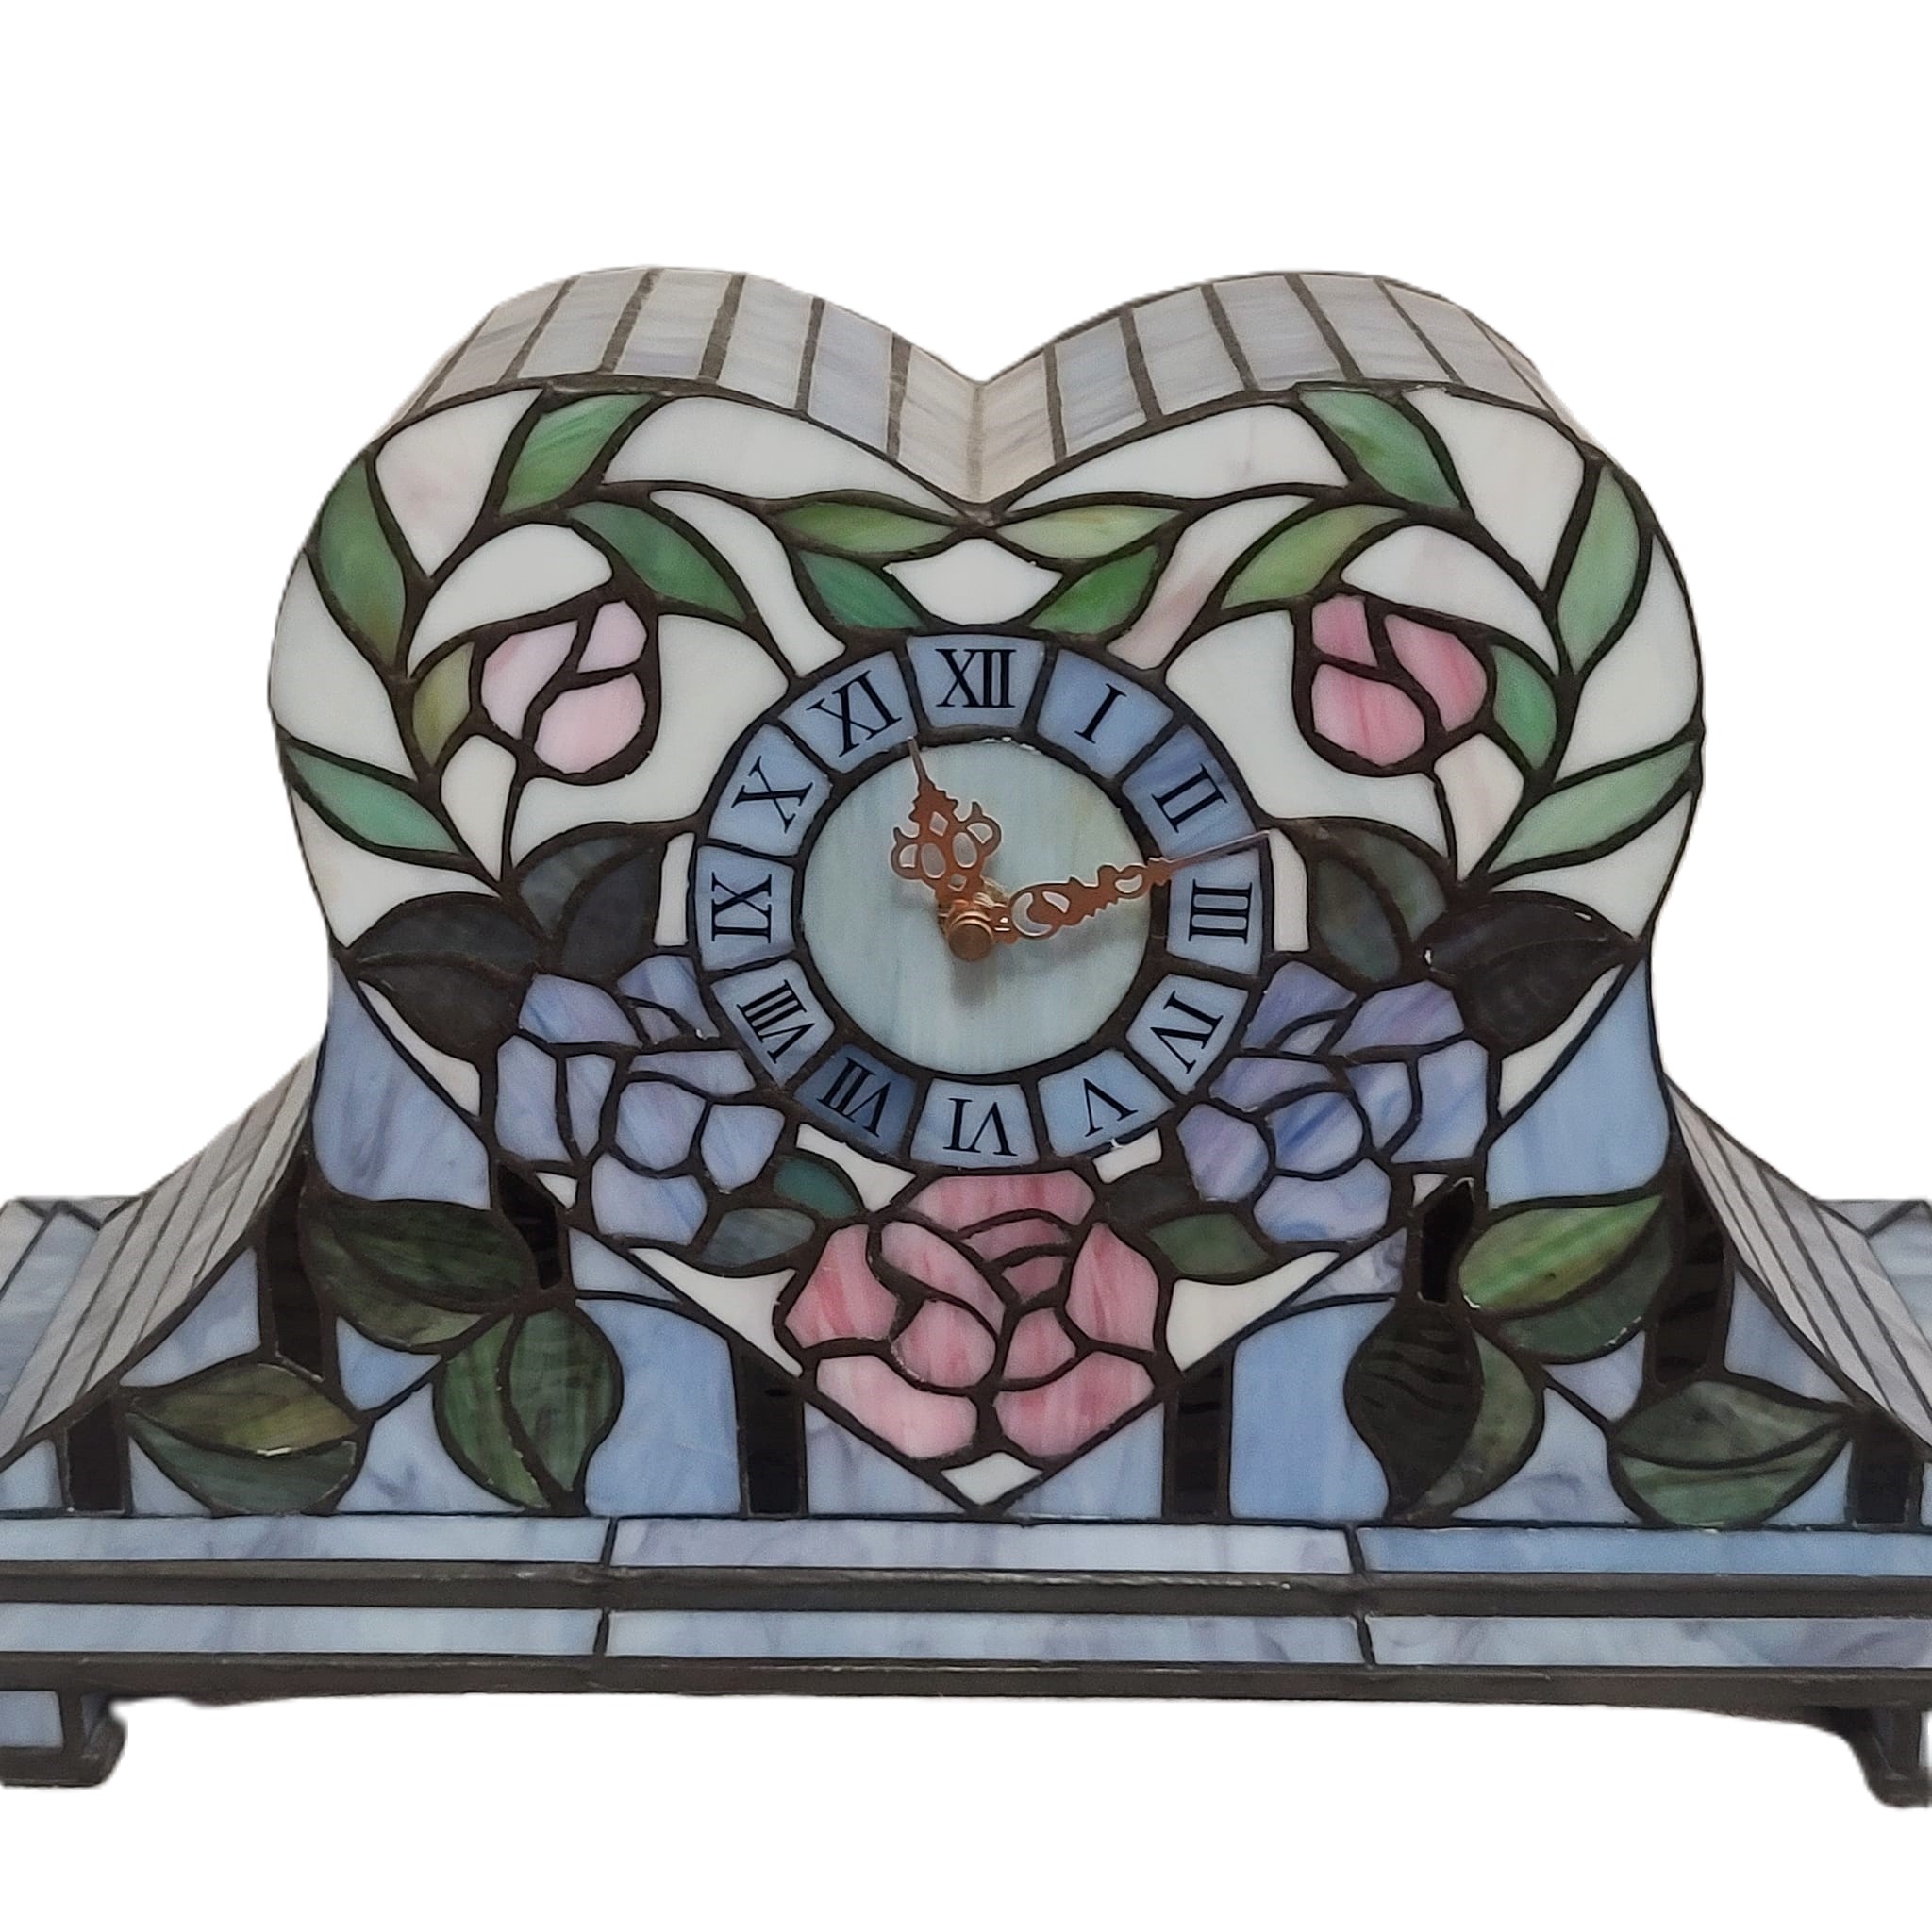 Tiffany style blue stained glass heart design mantel clock